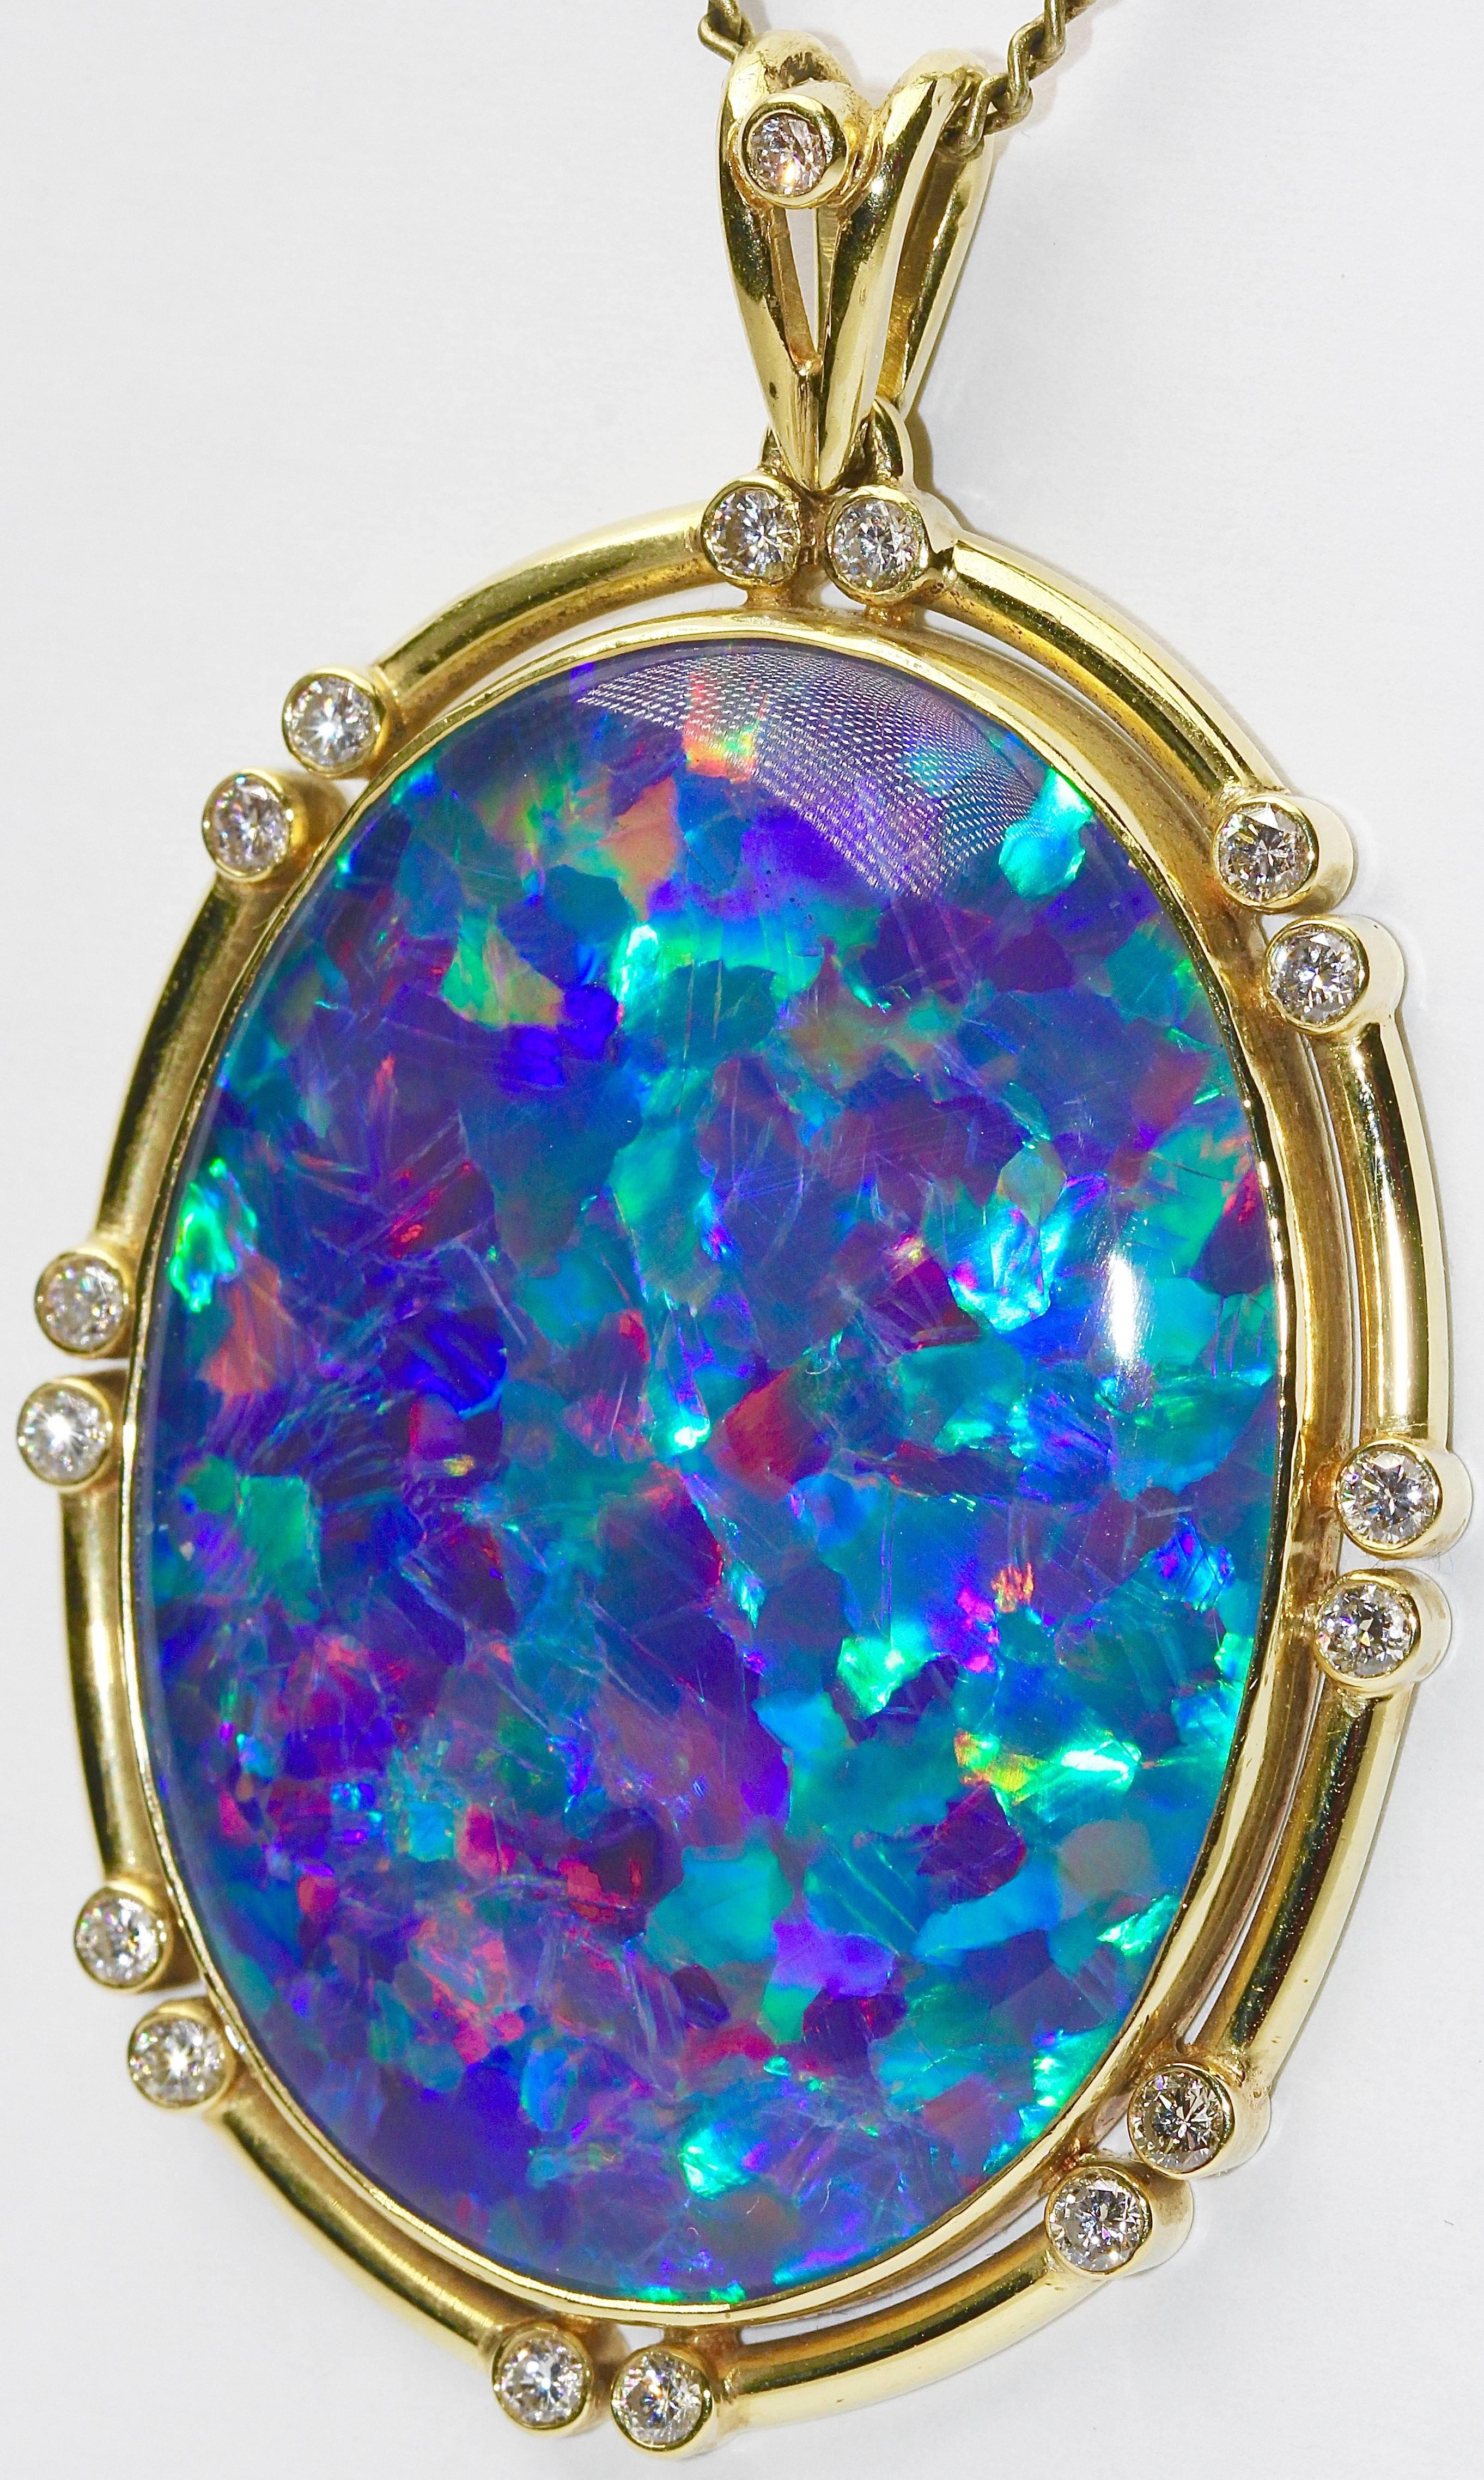 Beautiful, large opal pendant. 14k yellow gold frame. Set with a total of 17 diamonds, each approx. 0.05 carat.

Length without eyelet approx. 49.5 mm
Width: 37 mm